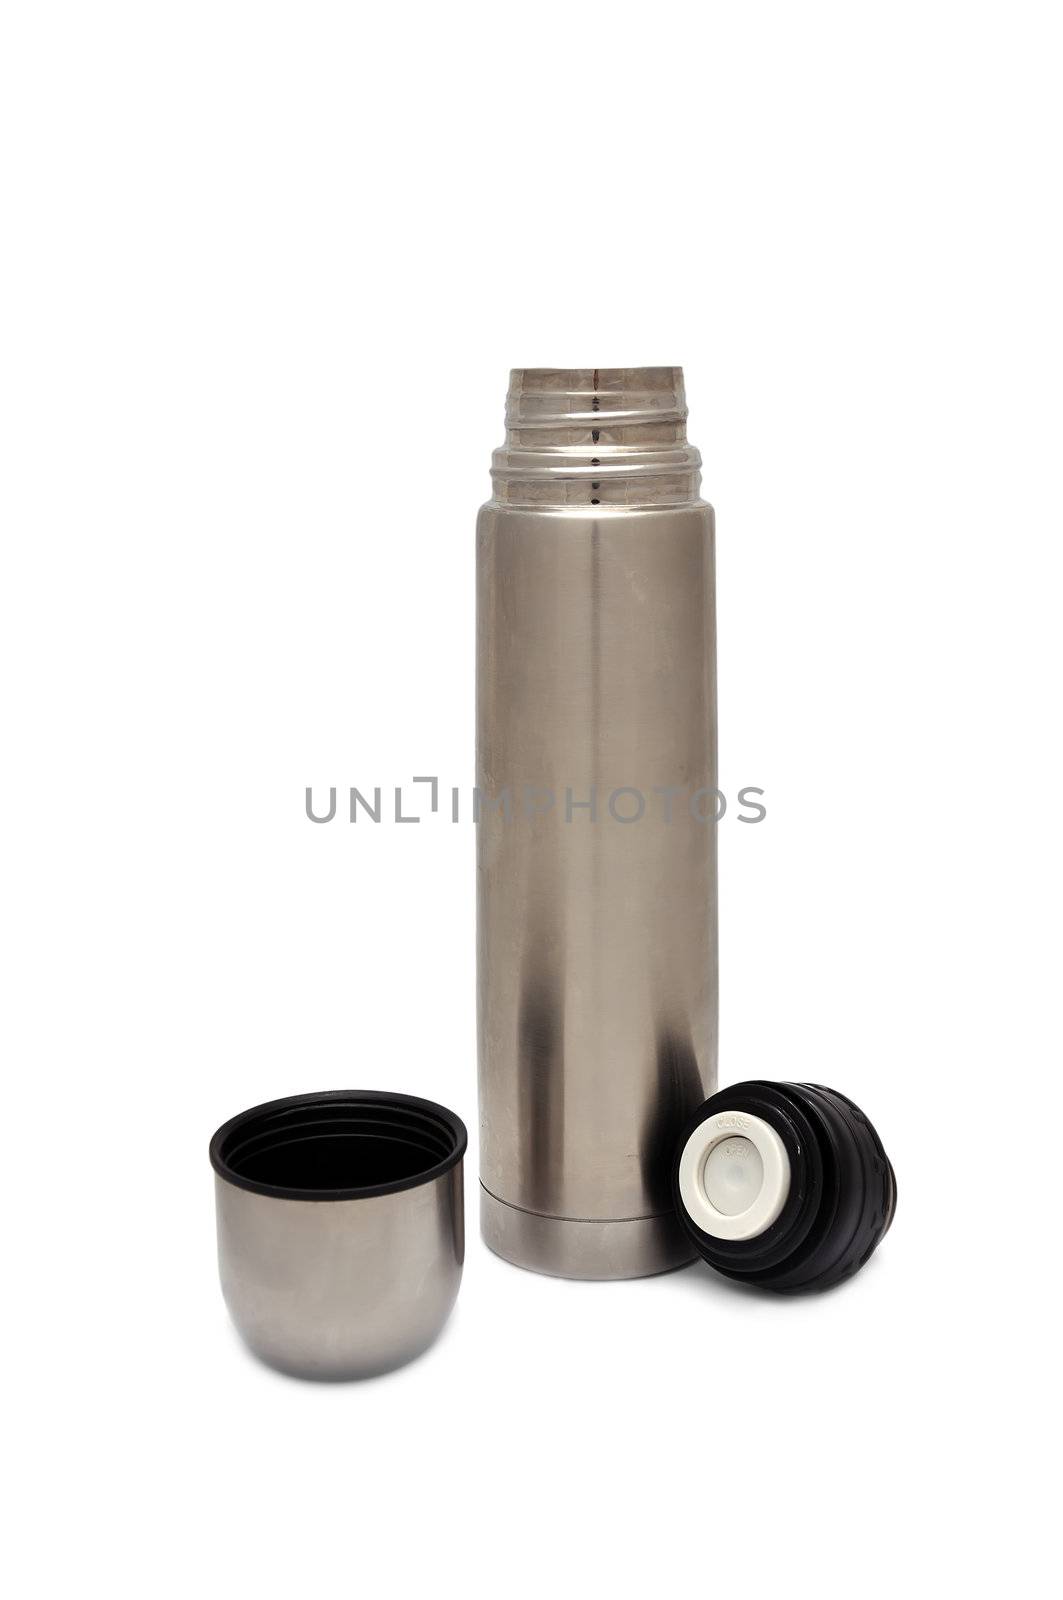 metal thermos on a white background